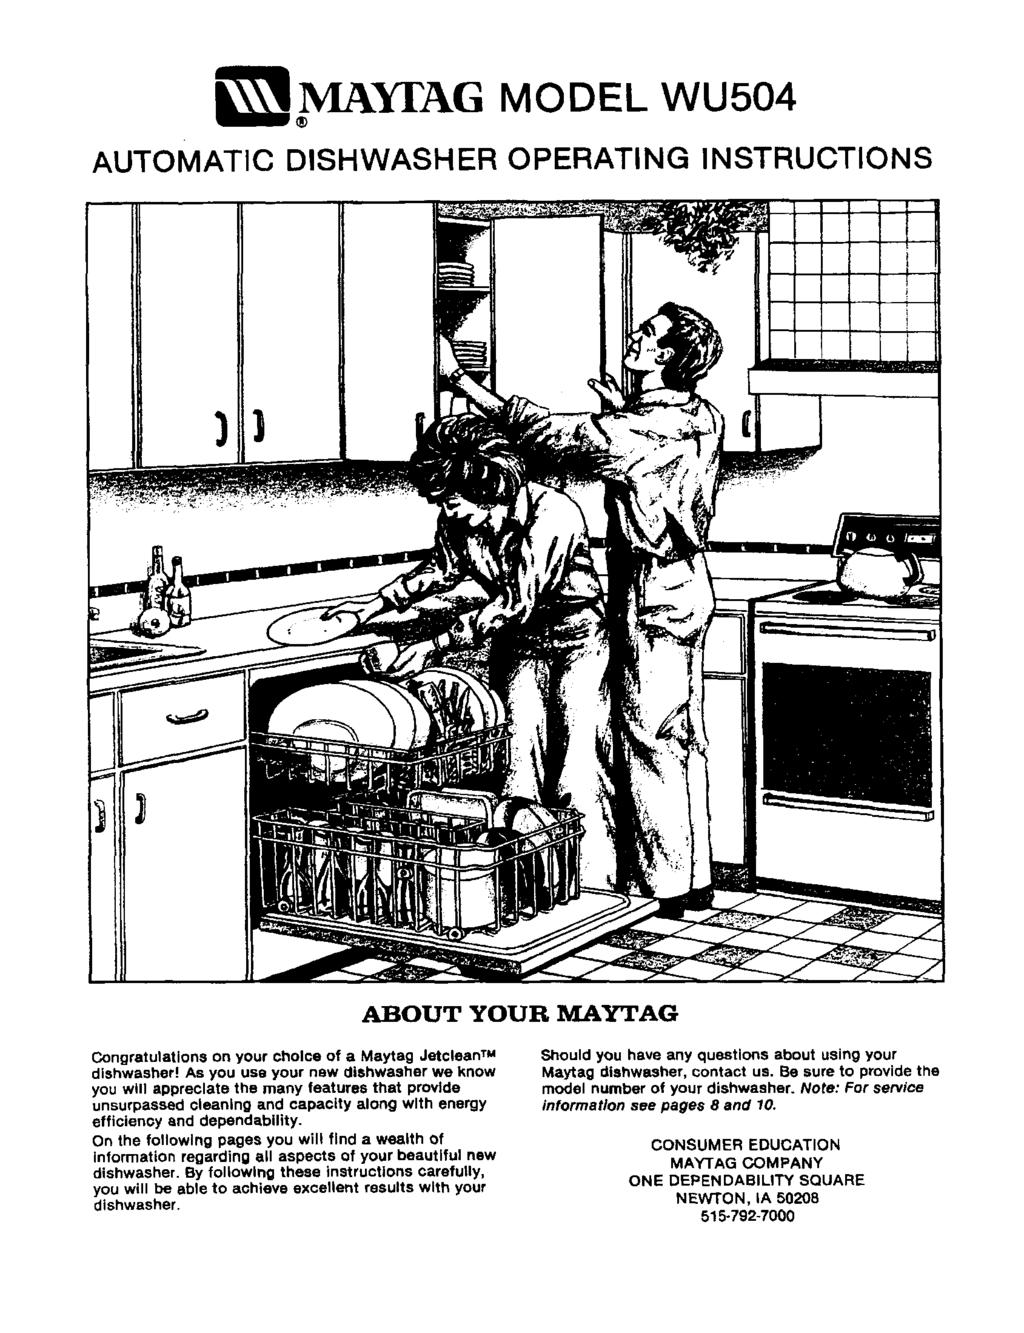 MAYI'AG MODEL WU504 AUTOMATIC DISHWASHER OPERATING INSTRUCTIONS ABOUT YOUR MAYTAG Congratulations on your choice of a Maytag Jetclean TM dishwasher!